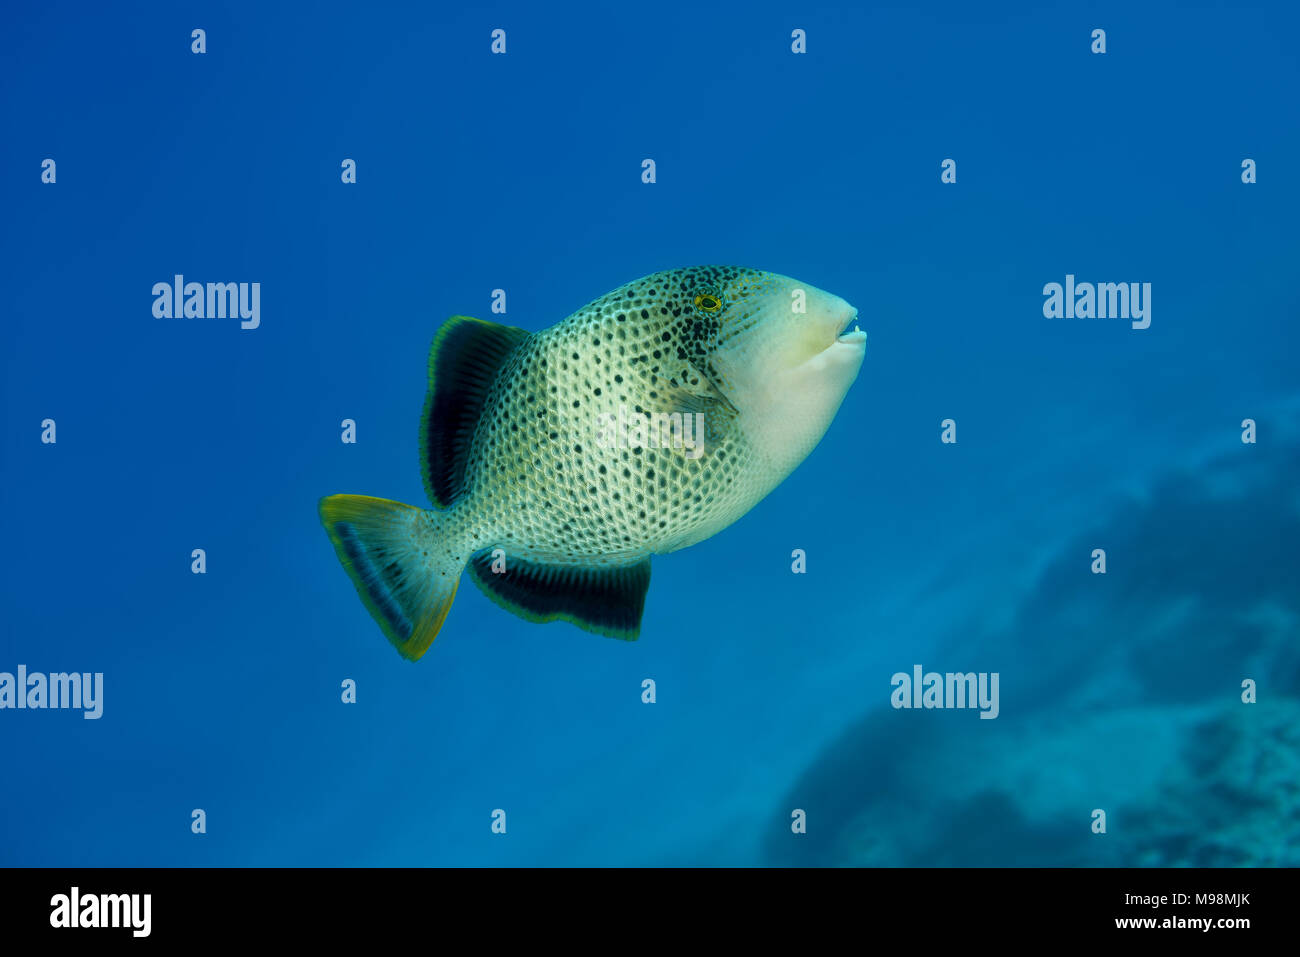 Yellowmargin Triggerfish (Pseudobalistes flavimarginatus) swims in the blue water over coral reef Stock Photo